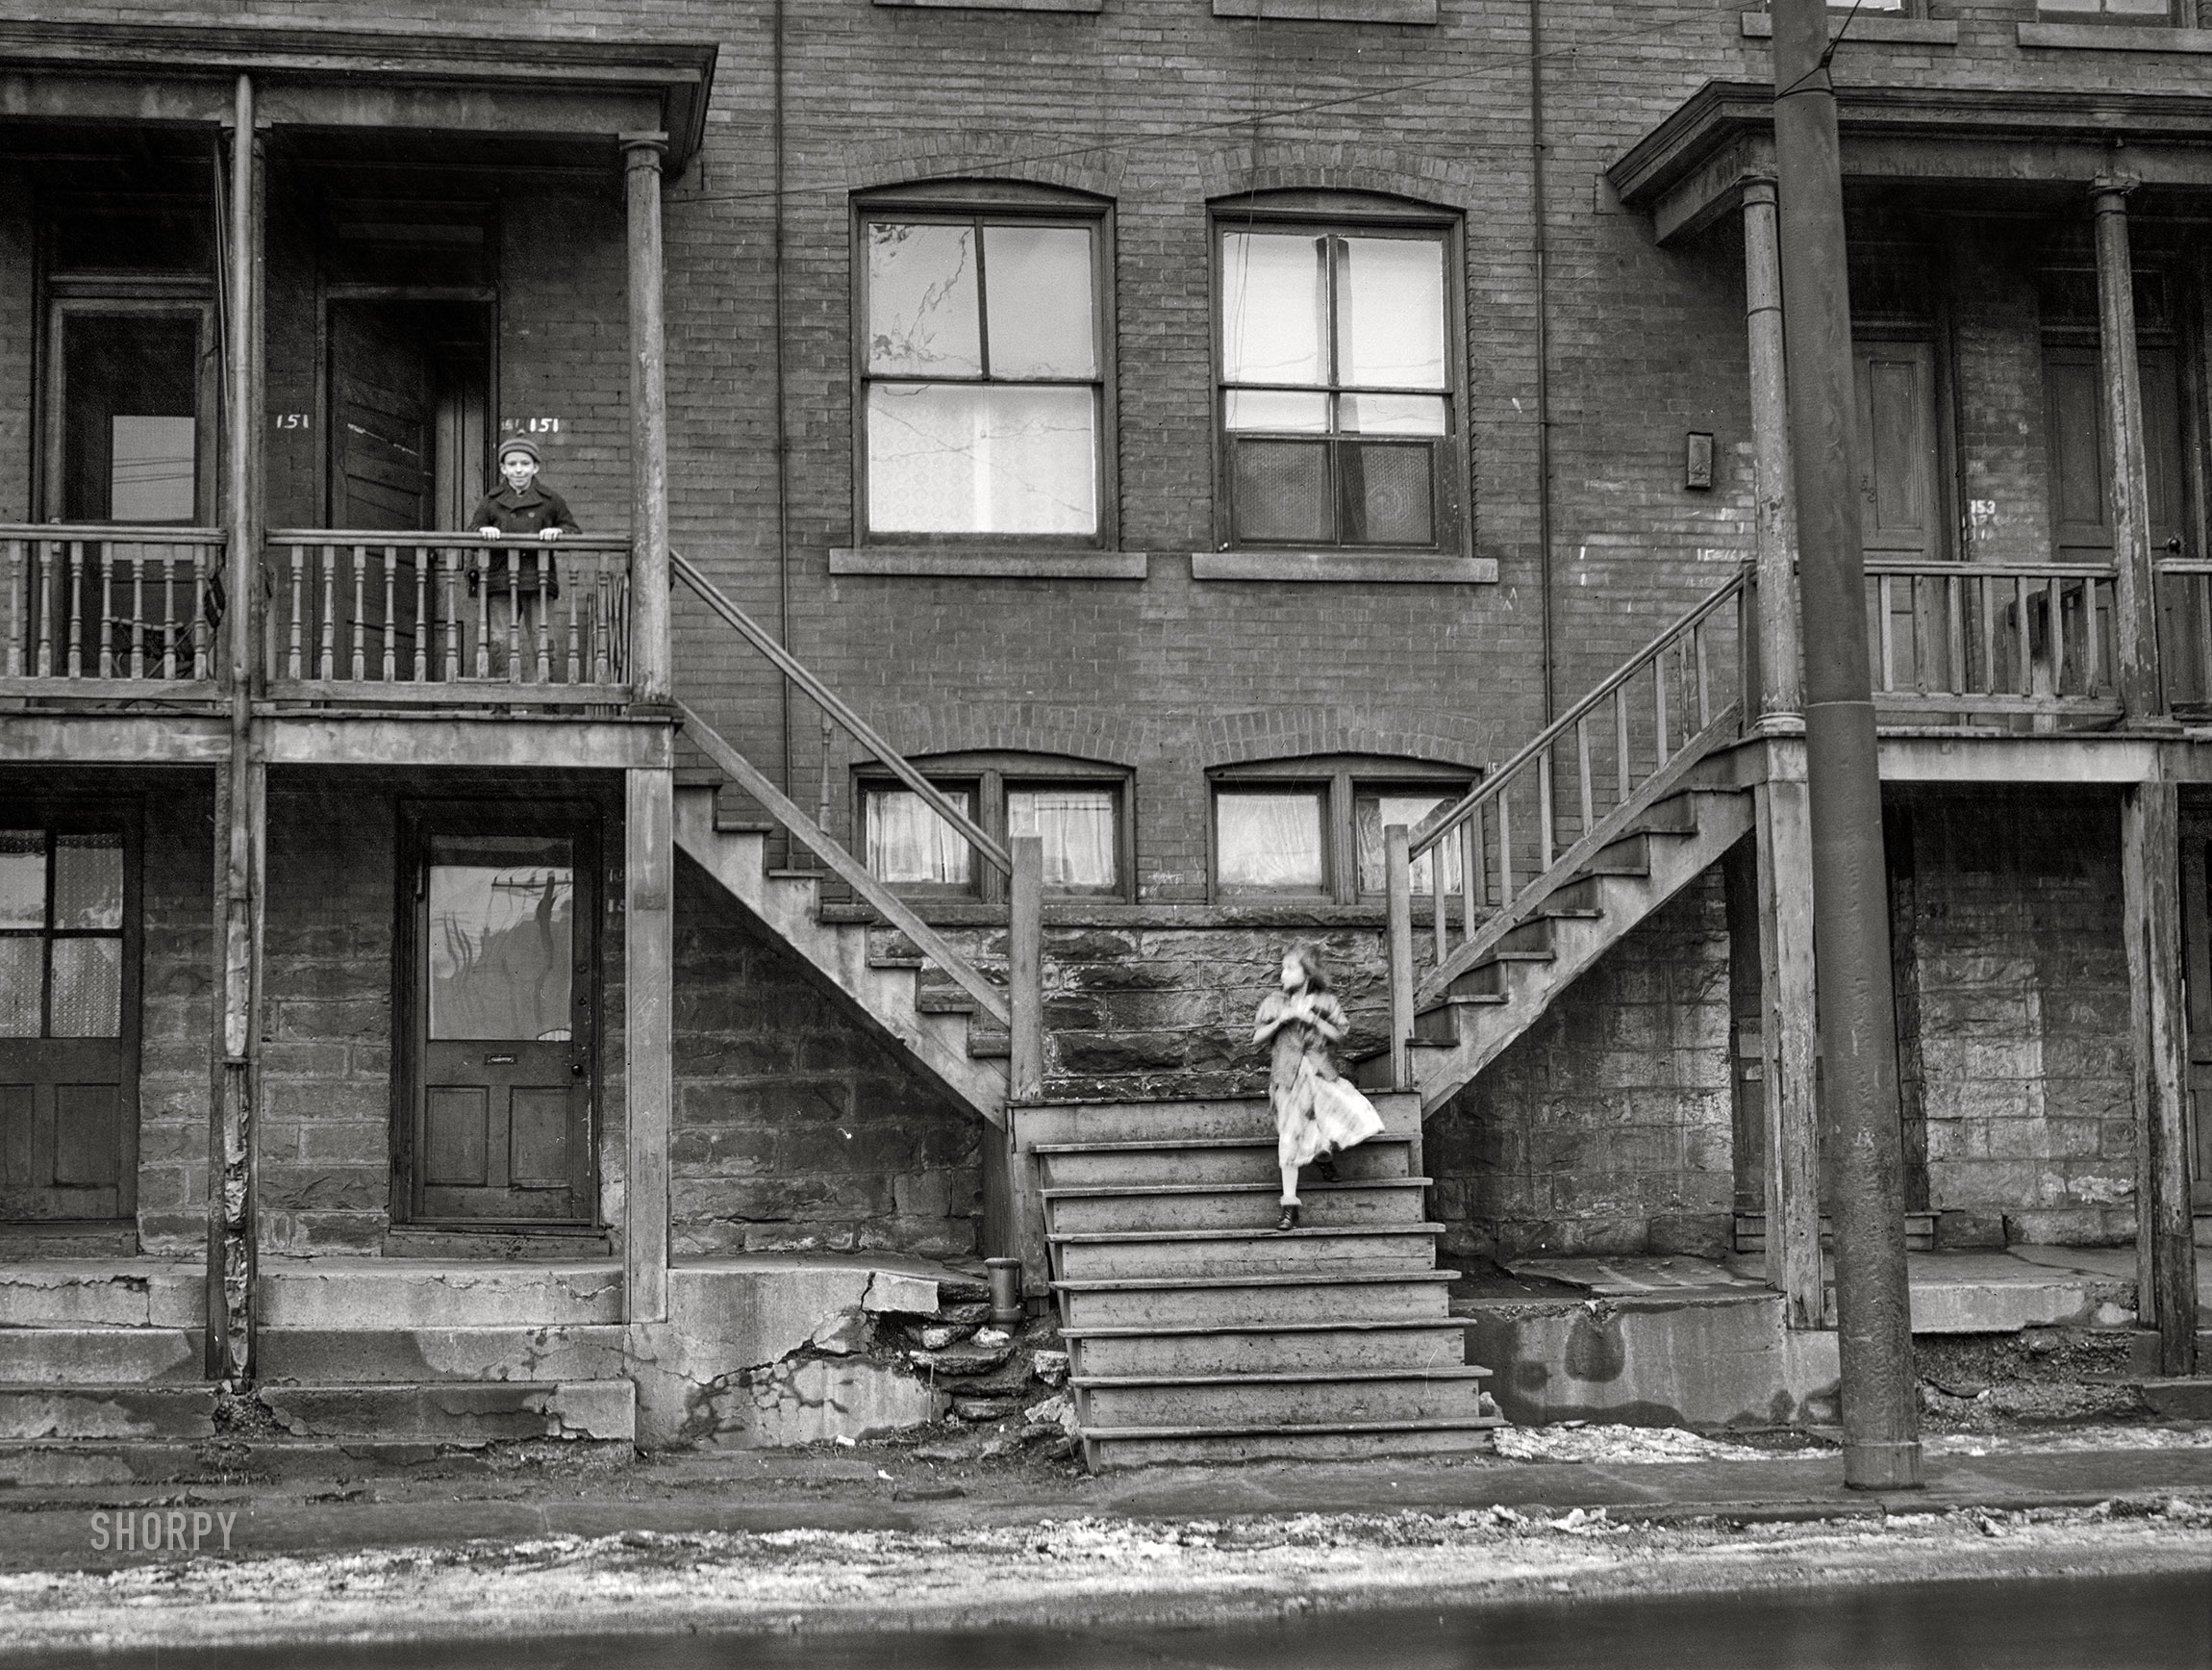 January 1941. "In a slum area of Pittsburgh, Pennsylvania." Medium format acetate negative by Jack Delano for the Farm Security Administration. View full size.